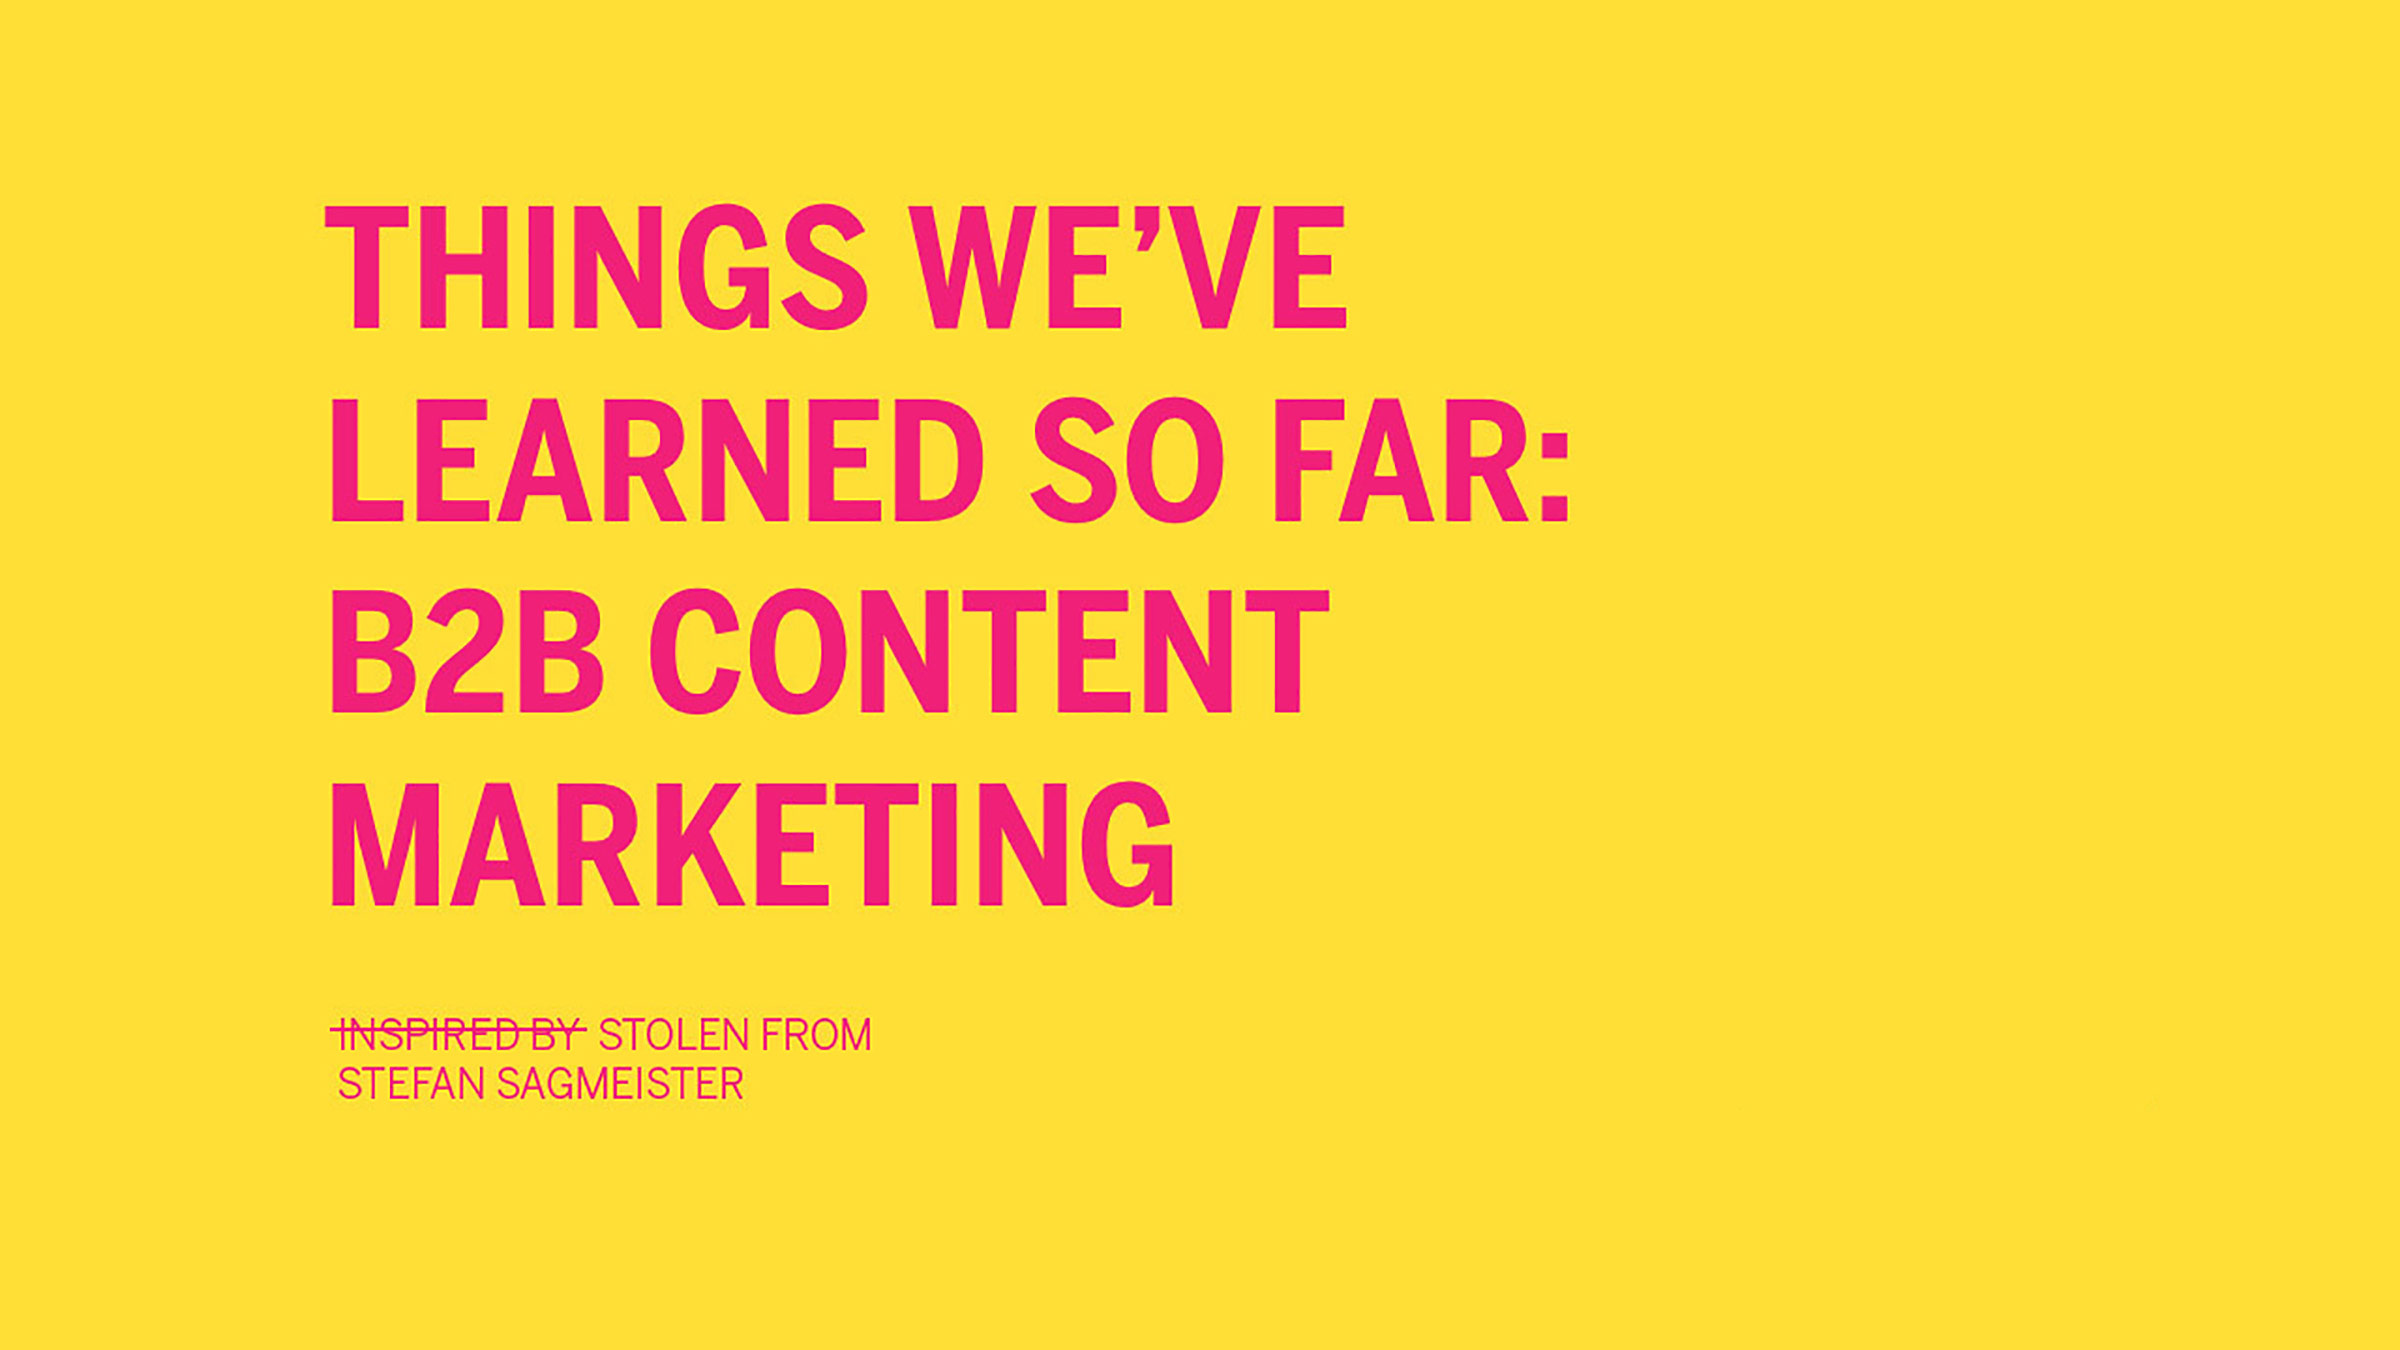 Things We've Learned: B2B Content Marketing